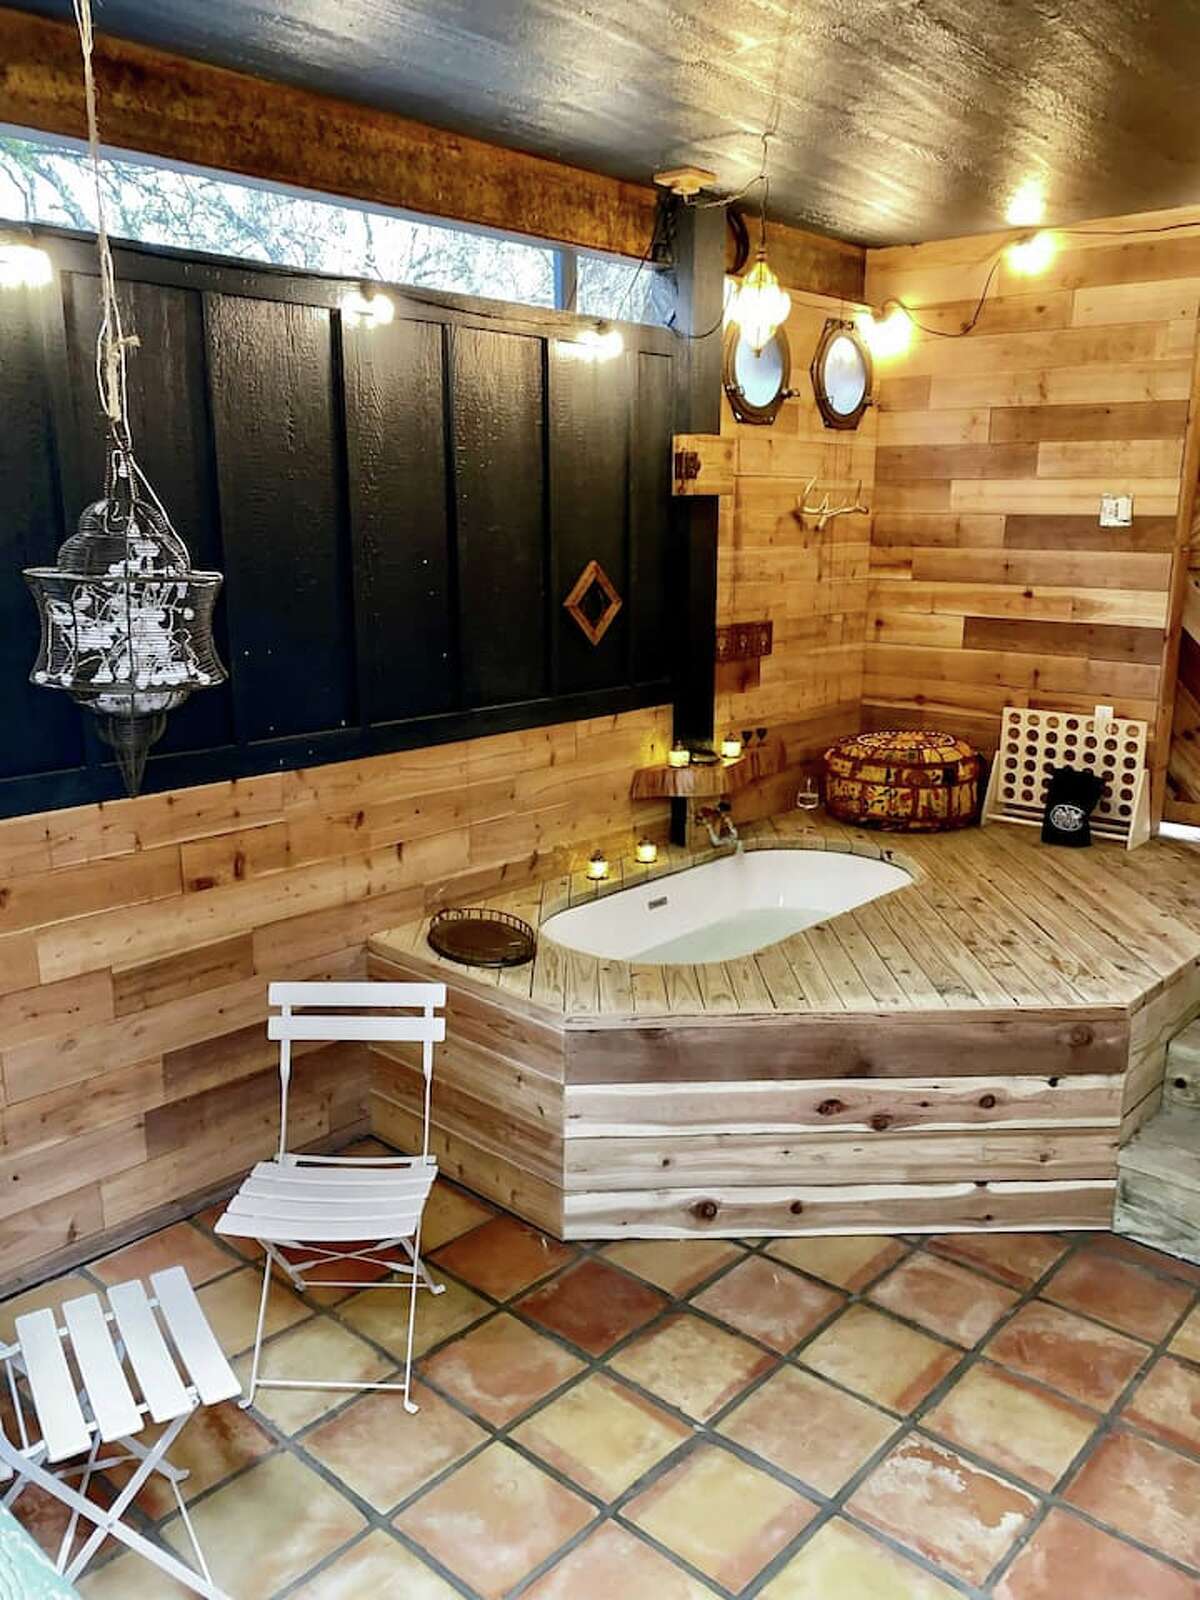 The treehouse features an outdoor bathroom and a fully functioning kithcenette. 